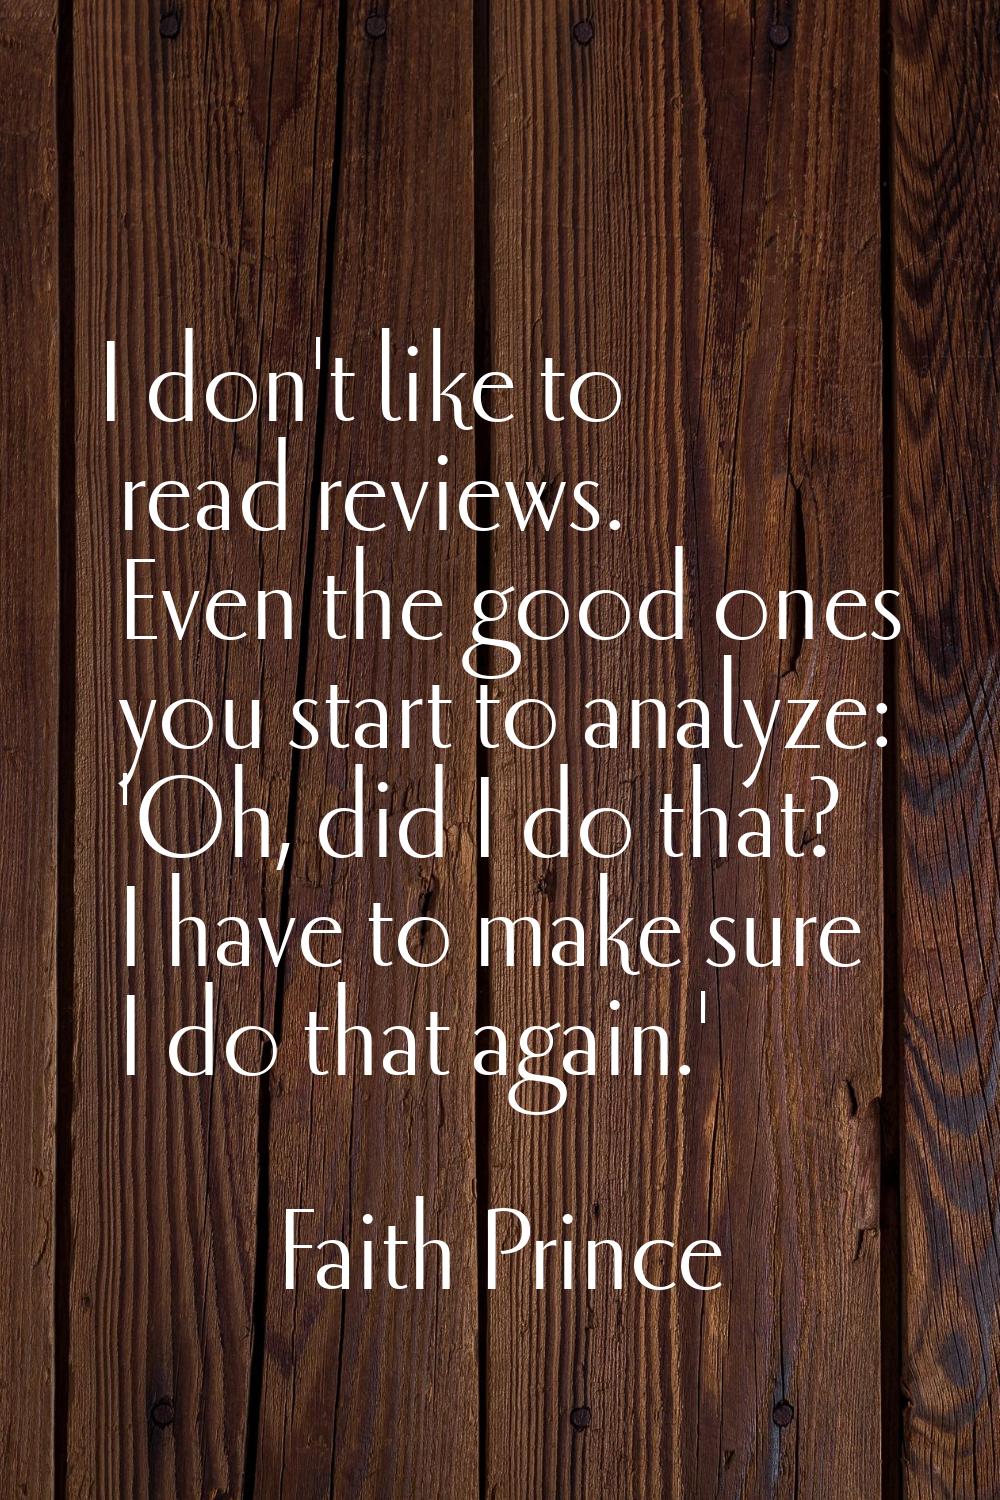 I don't like to read reviews. Even the good ones you start to analyze: 'Oh, did I do that? I have t